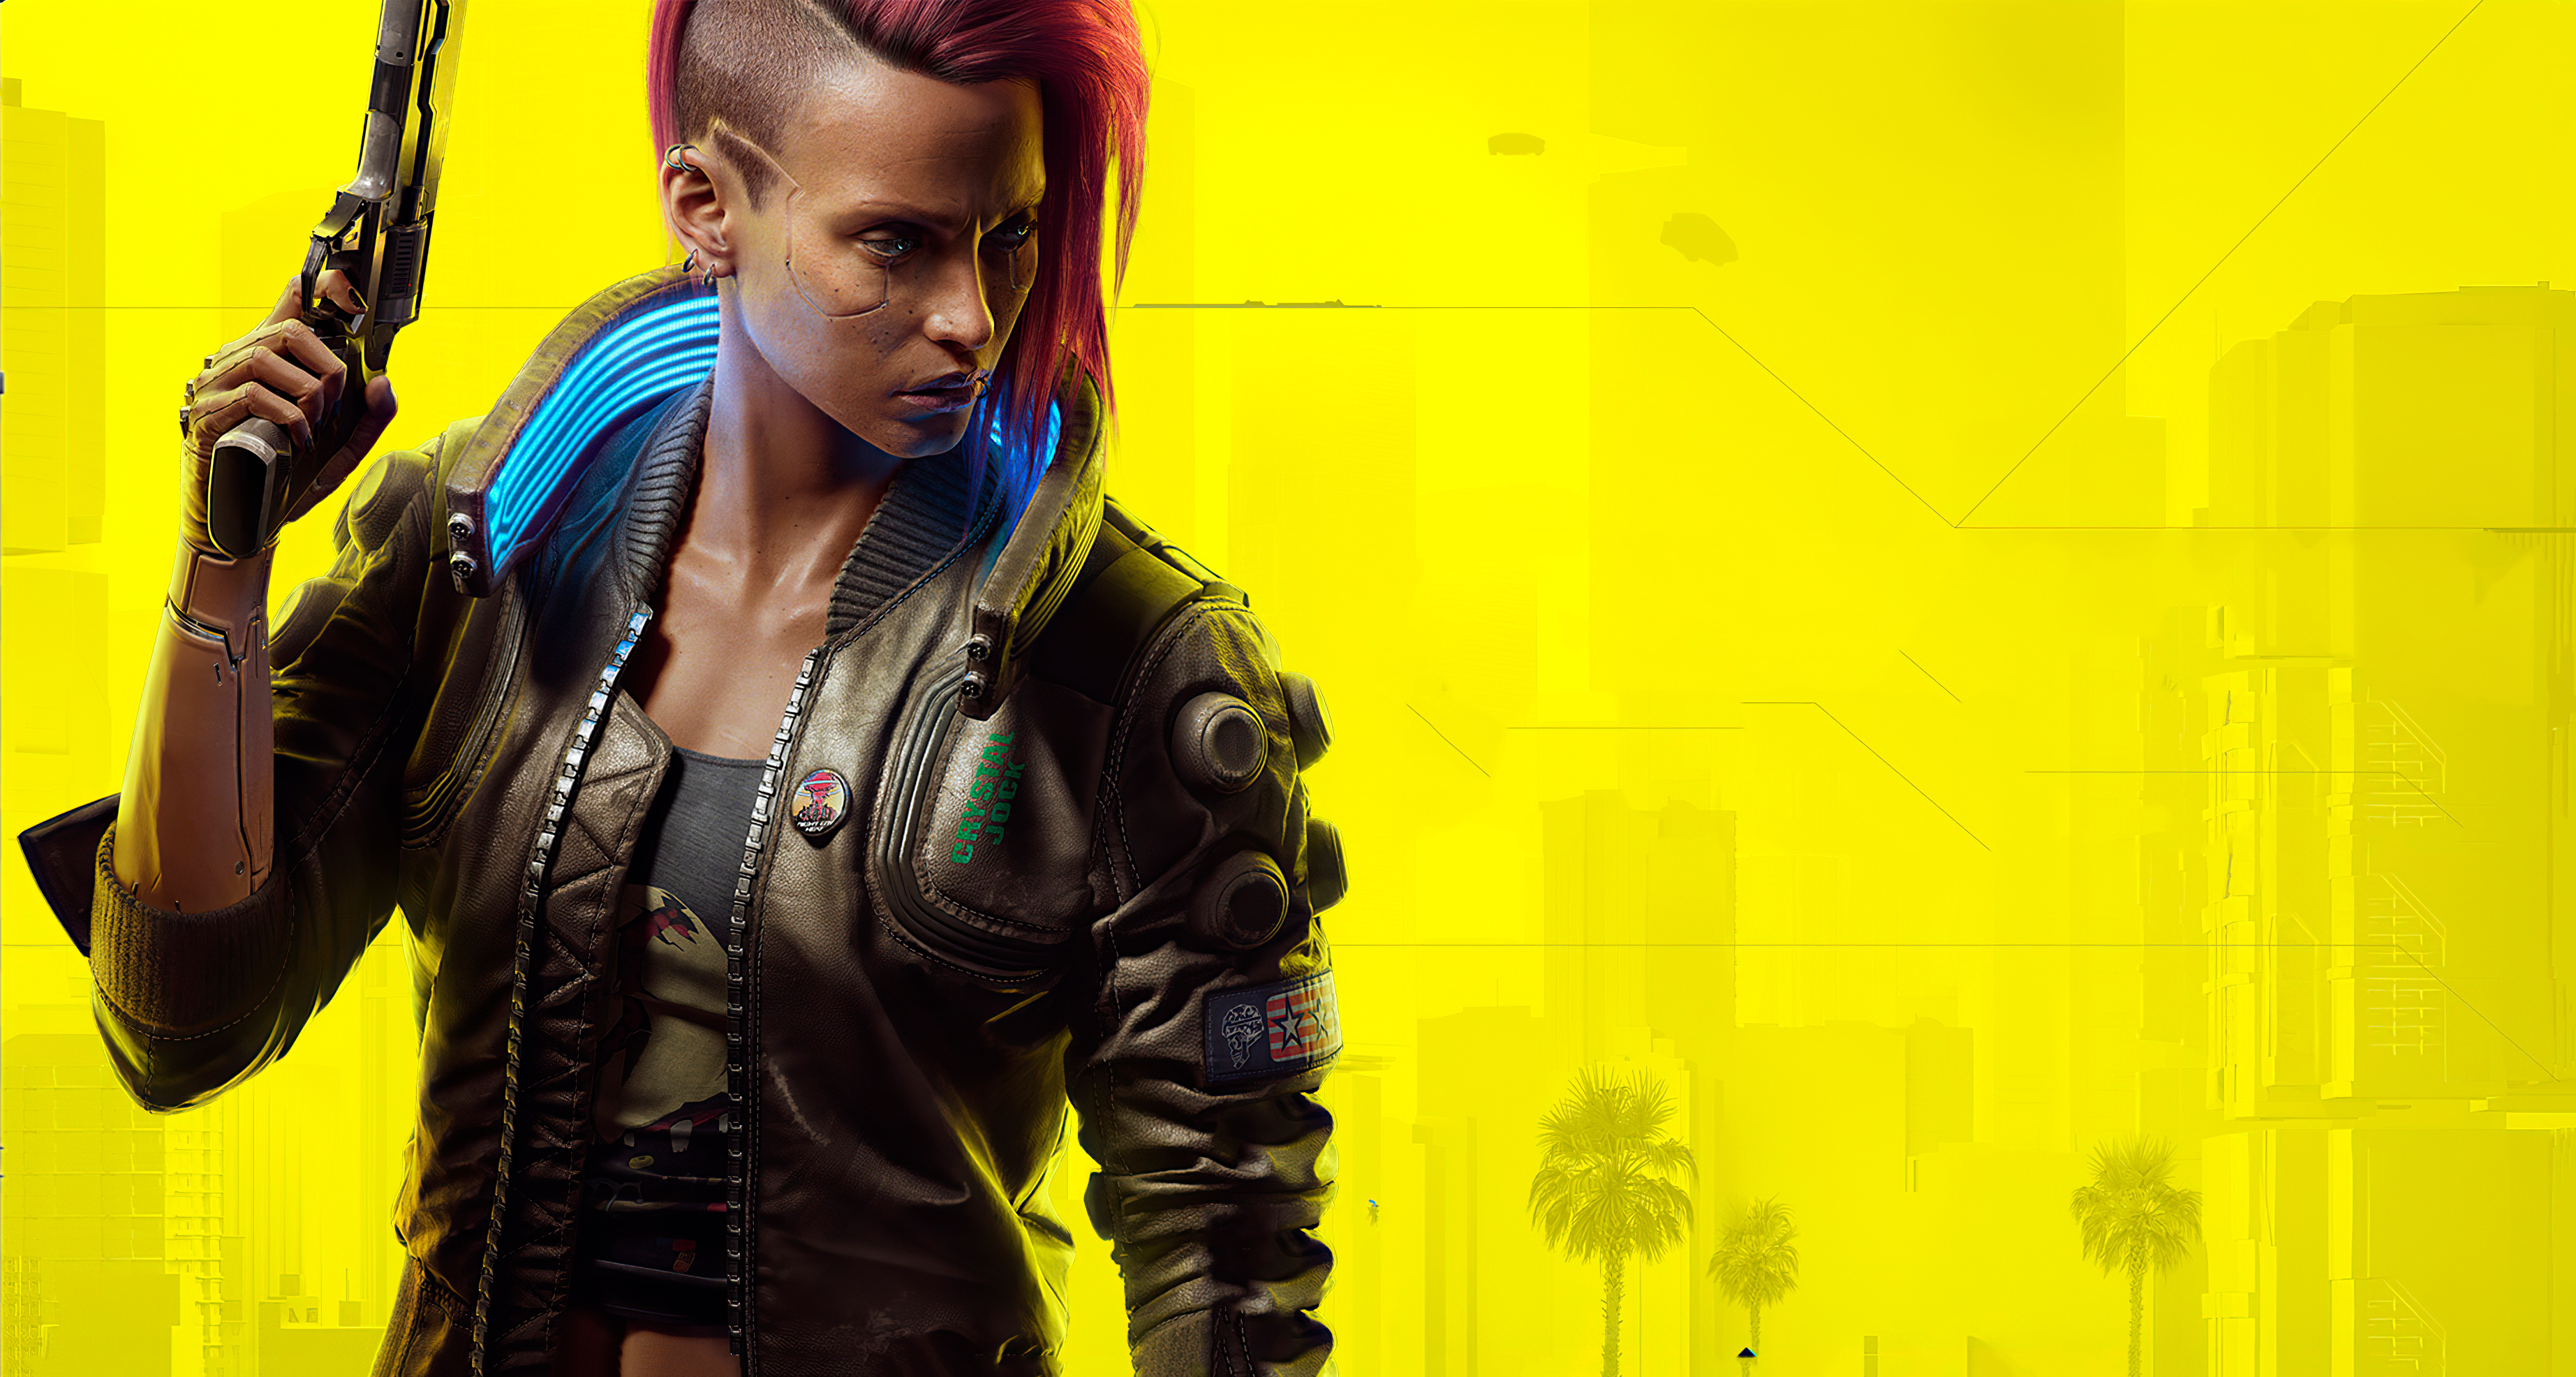 4k Cyberpunk 2077 2020, HD Games, 4k Wallpapers, Images, Backgrounds